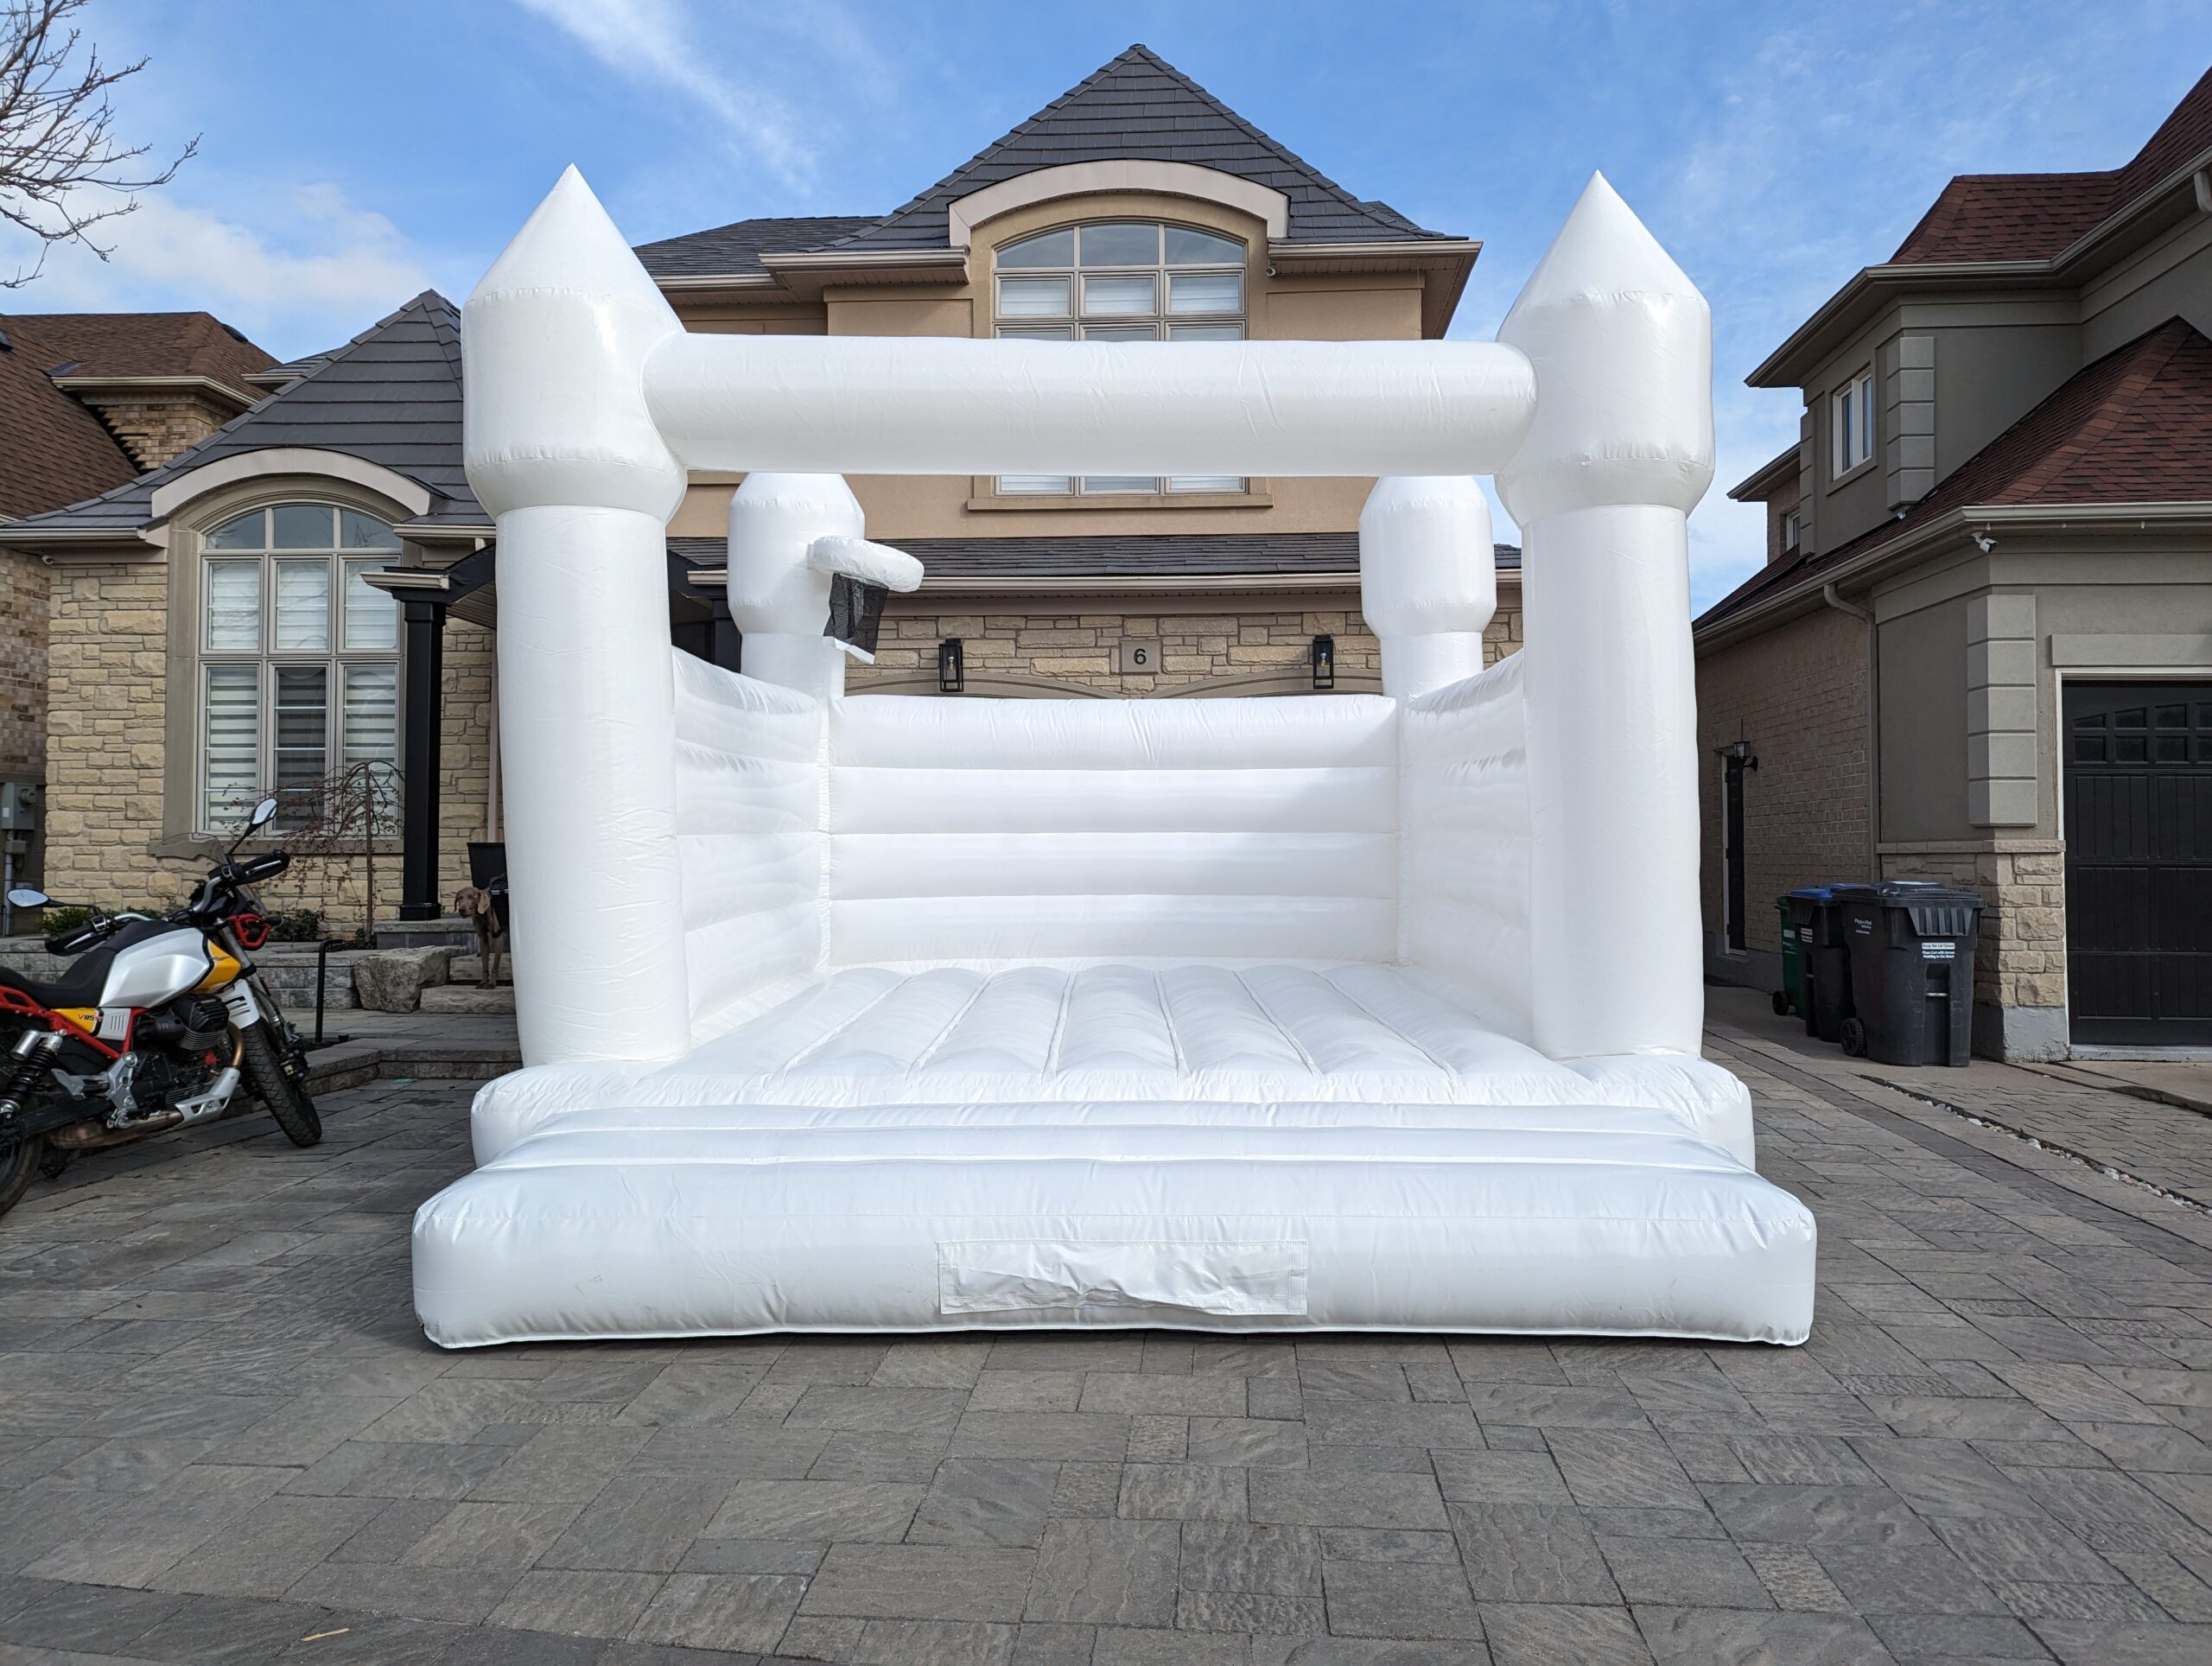 WOW!!!—White bouncy Castle—WOW!!!!